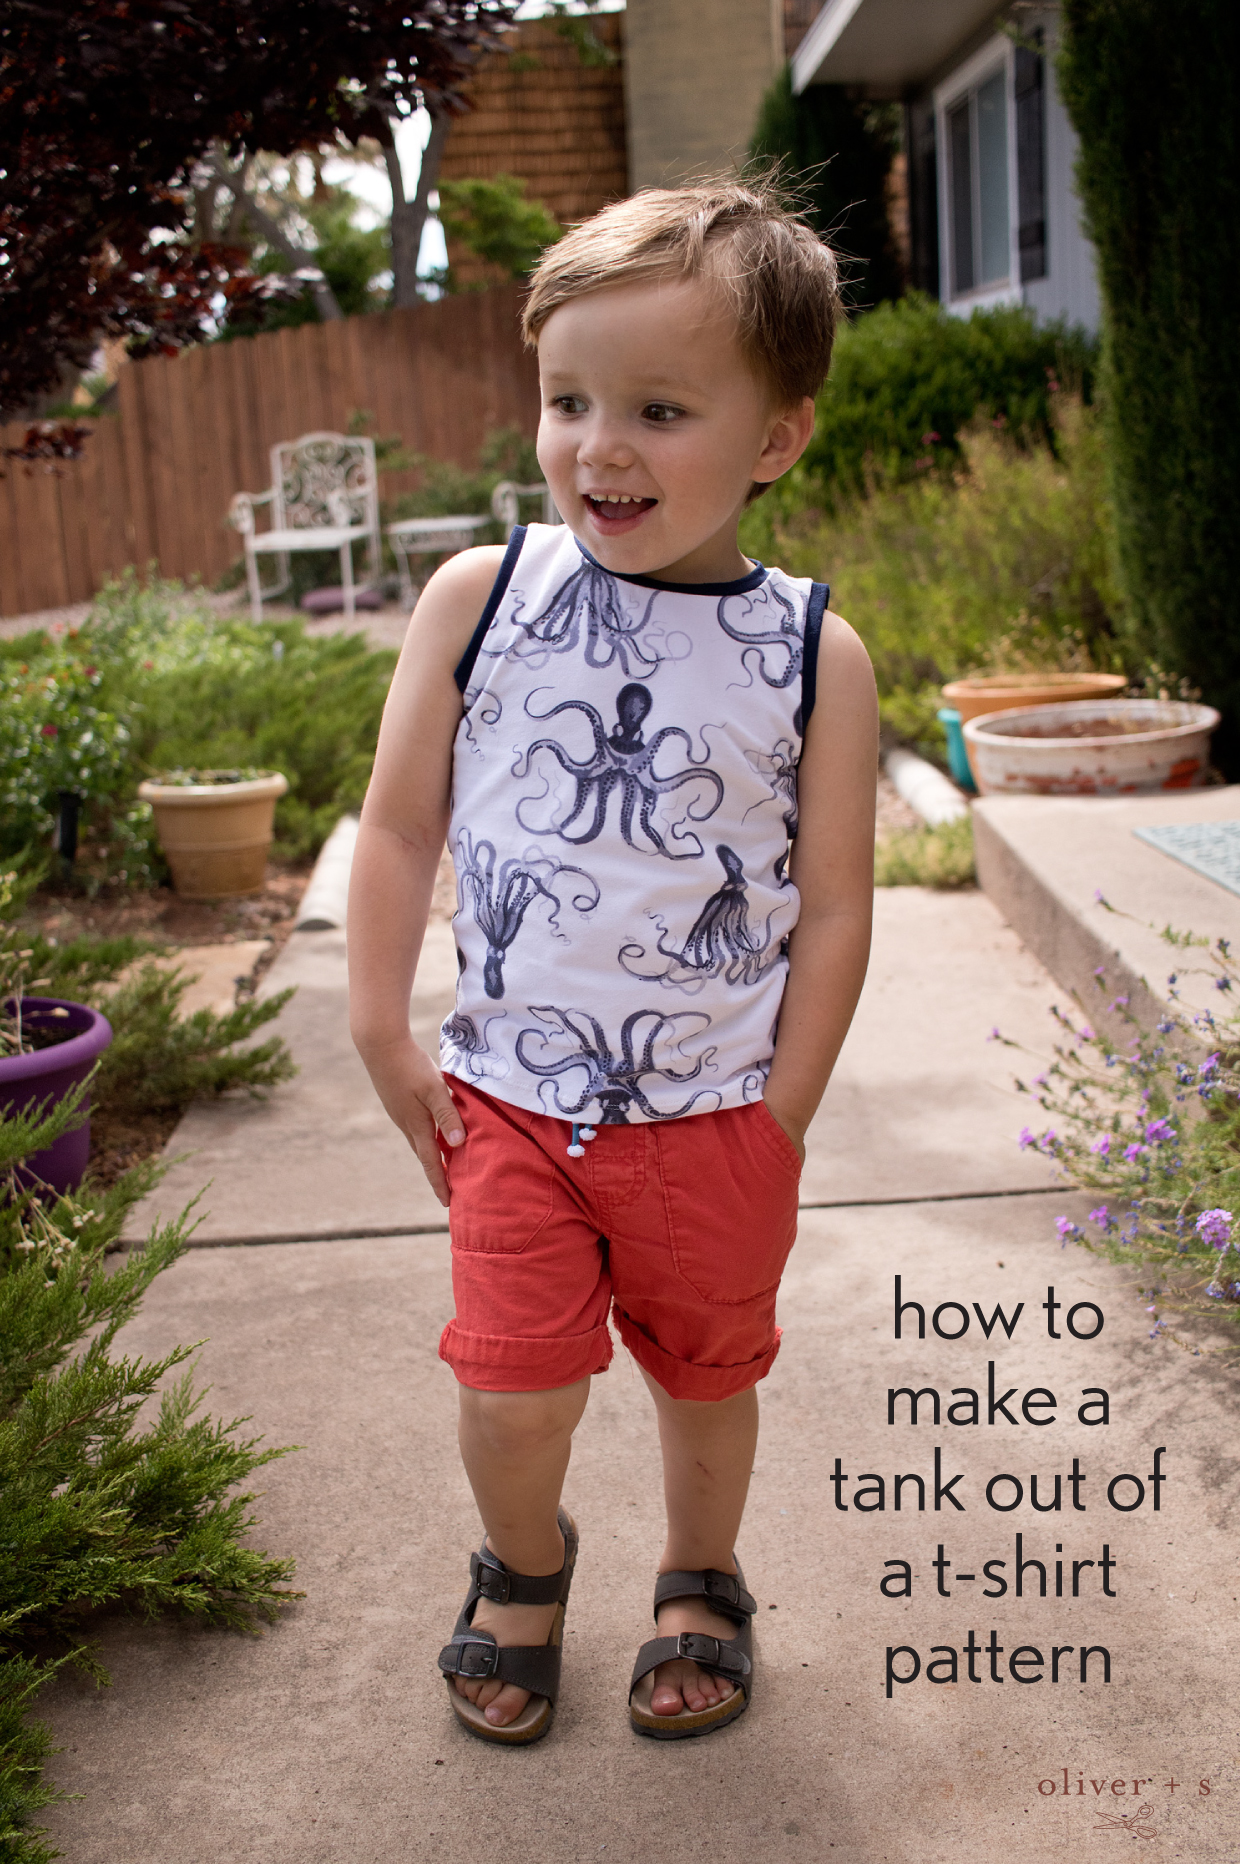 How to Make a Tank Out of a T-Shirt Pattern | Blog | Oliver + S